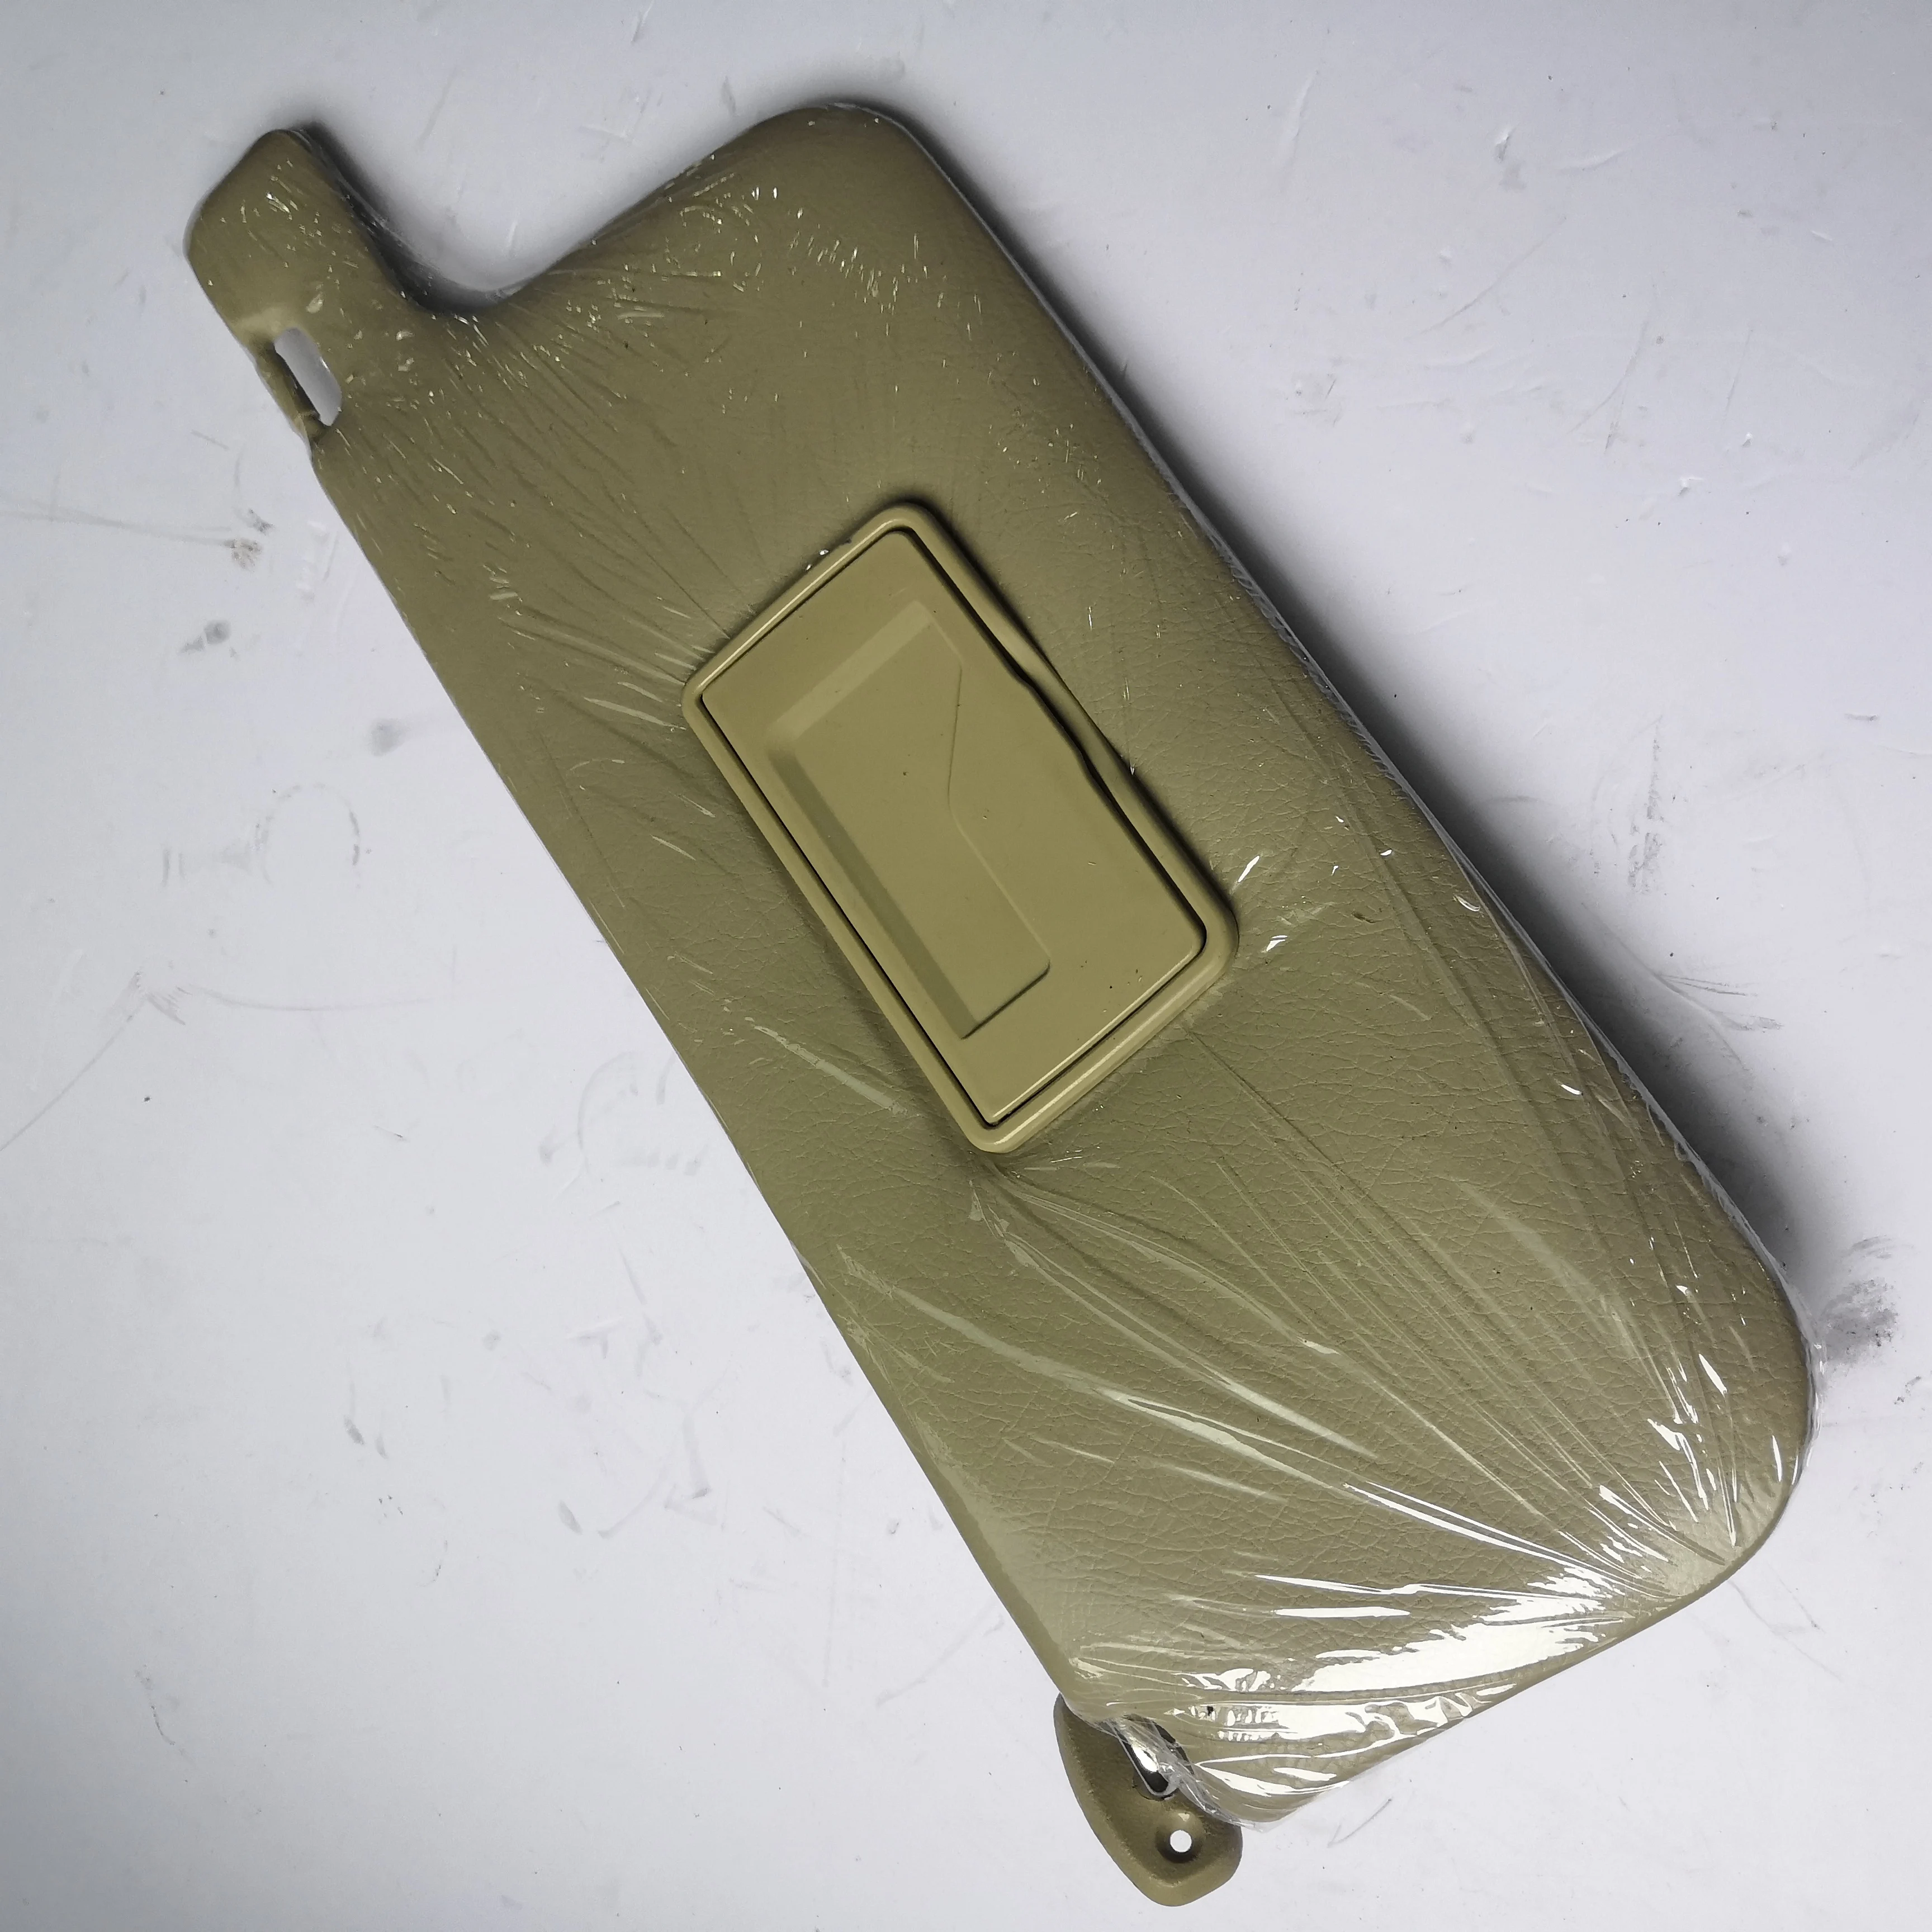 Sun Visor For Gonow Ga0 Buy Parts For Gonow Ga0 Light For Gonow Car Parts Product On Alibaba Com